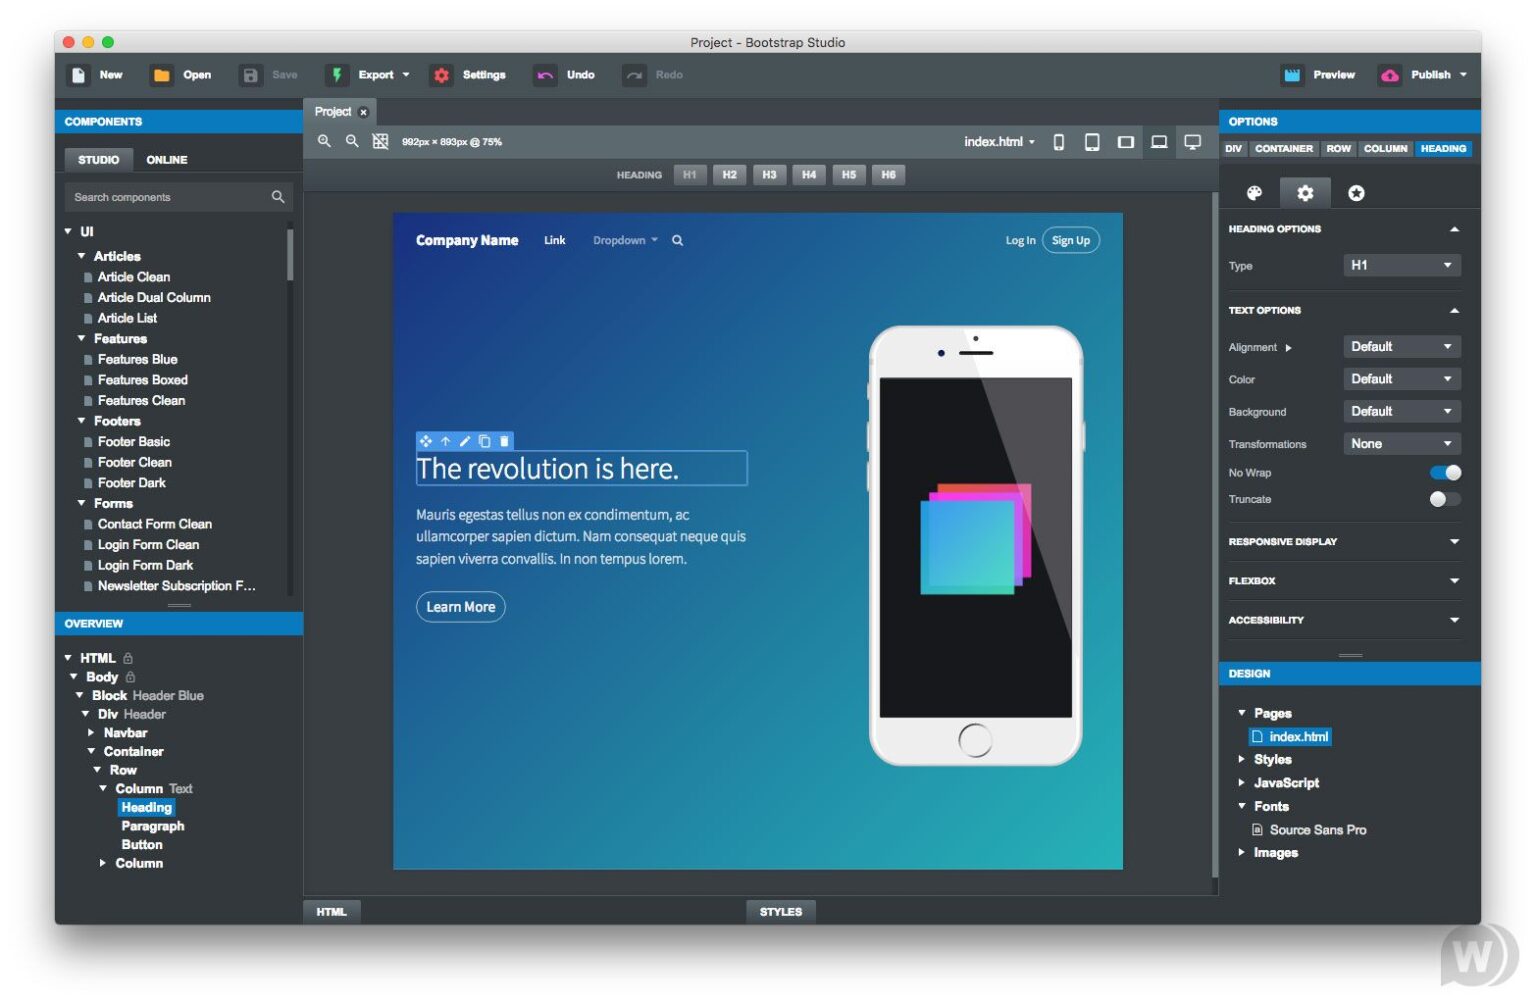 Bootstrap Studio 6.5.1 download the new for android